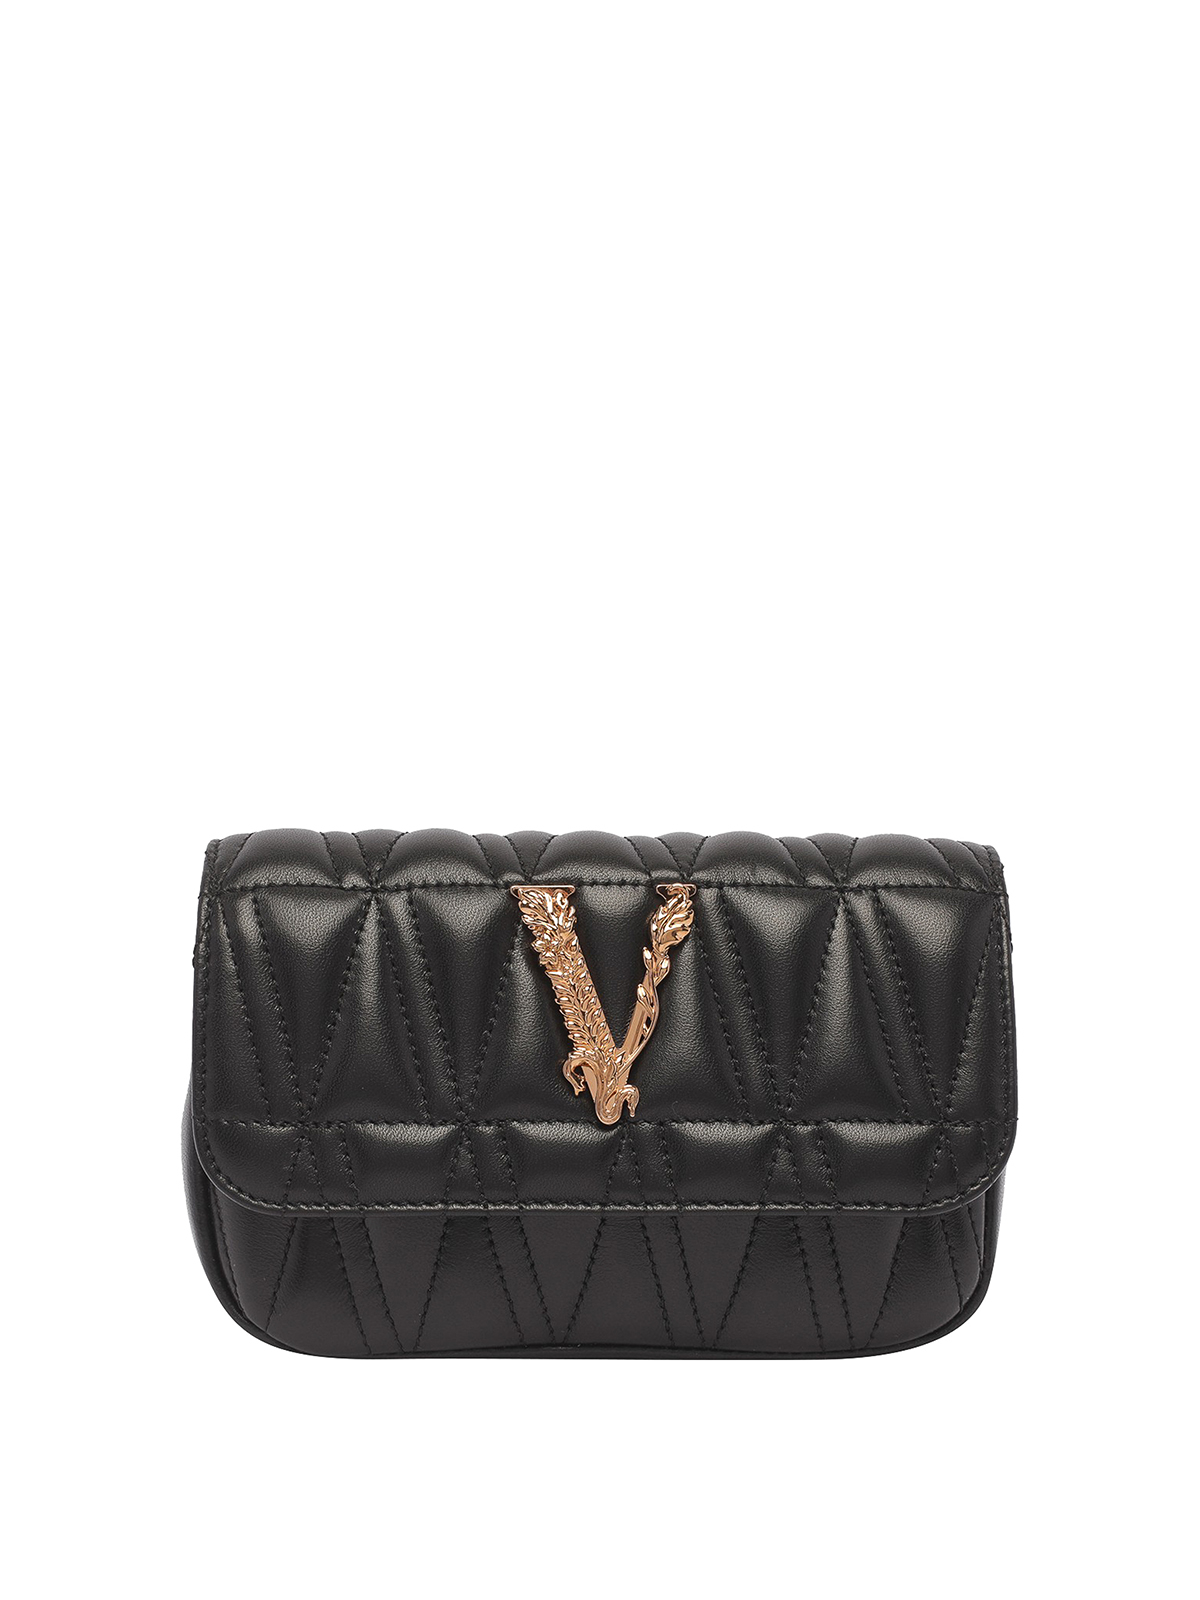 Versace Virtus Quilted Leather Bag In Black